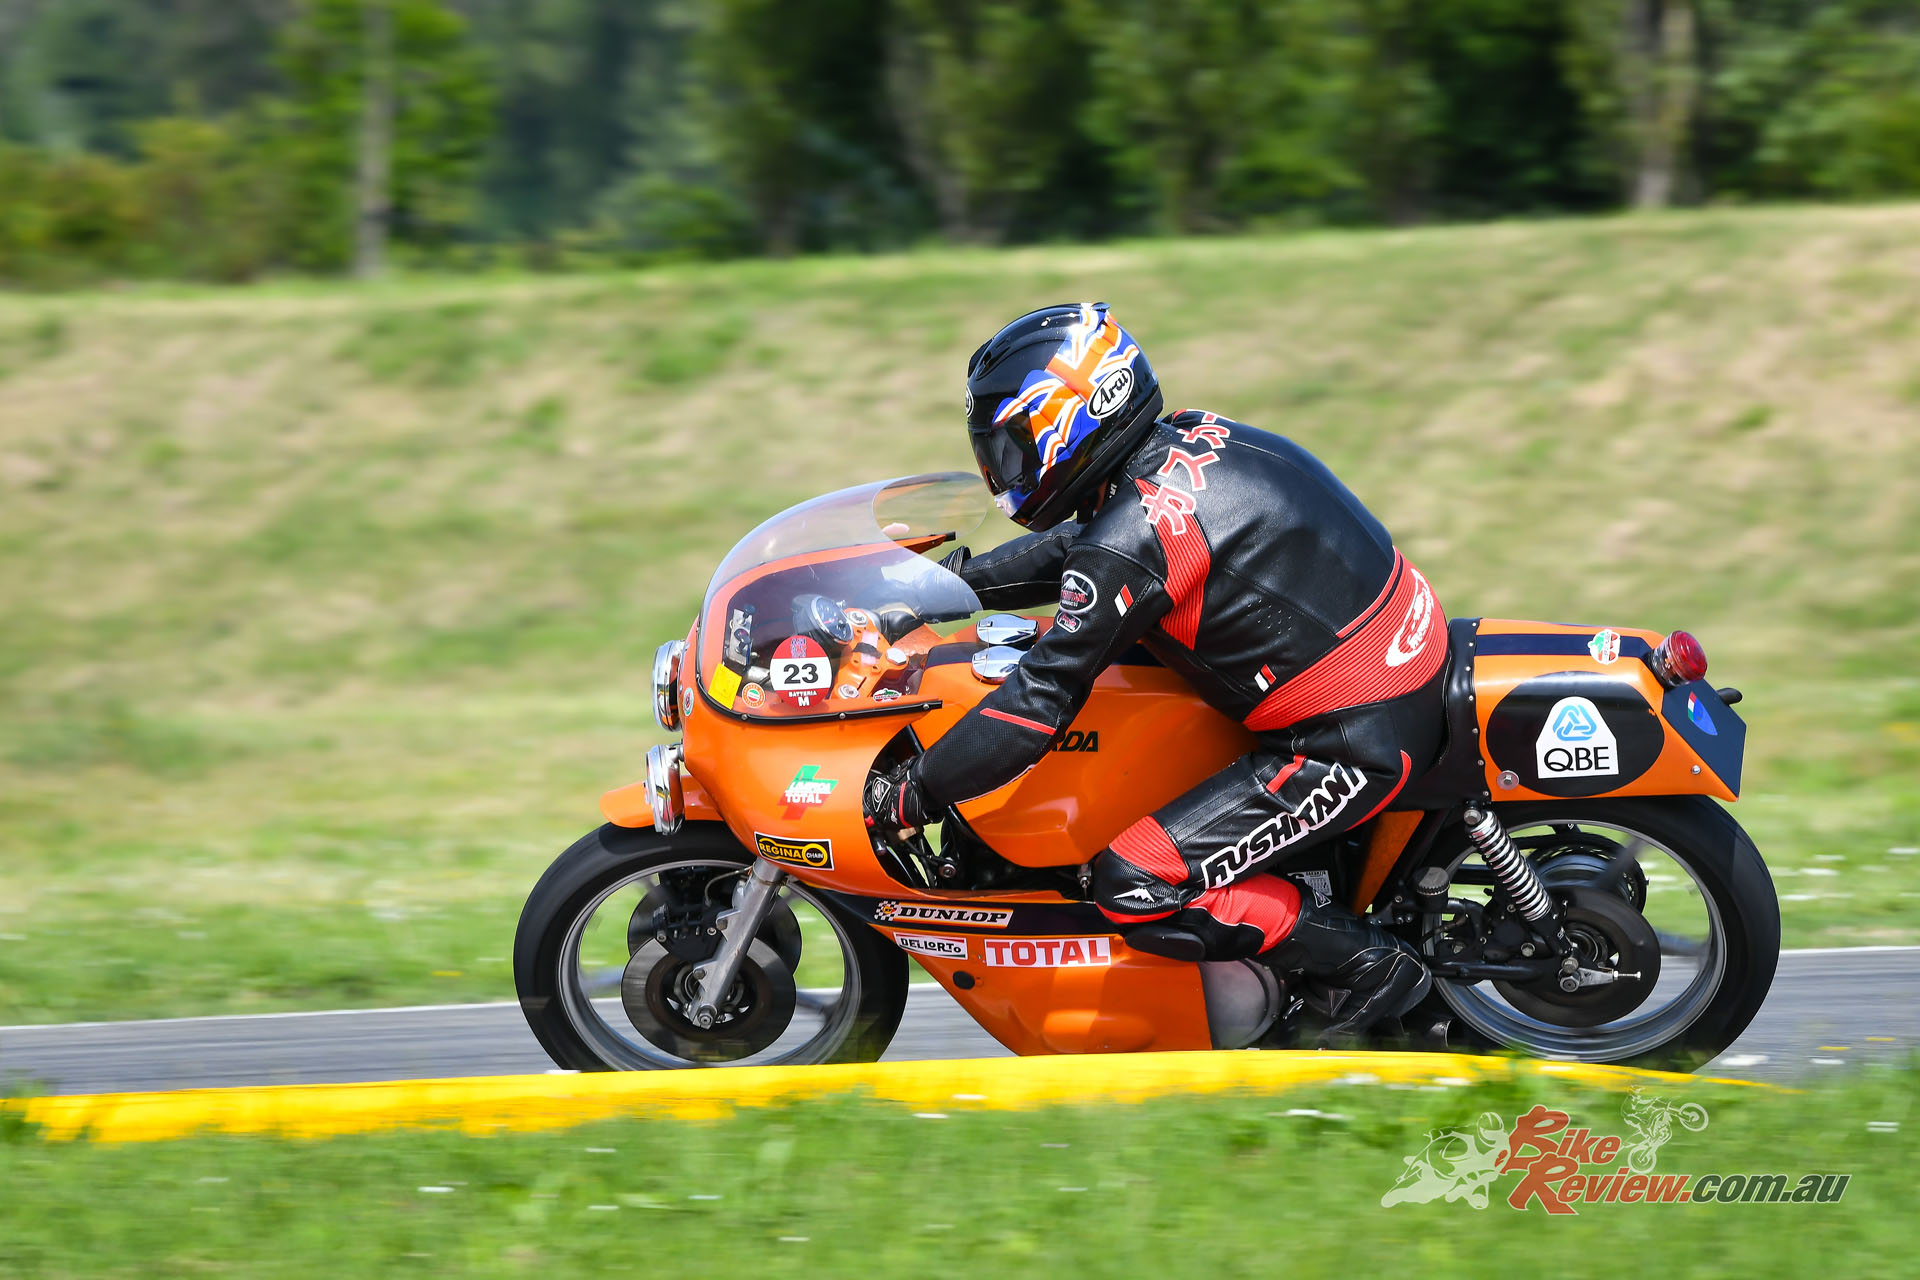 AC had the honour of two sessions on the busy 12-turn 2.38km Varano circuit aboard a bike whose engine remains essentially untouched since it was built up in 1976 after Laverda had retired from racing.